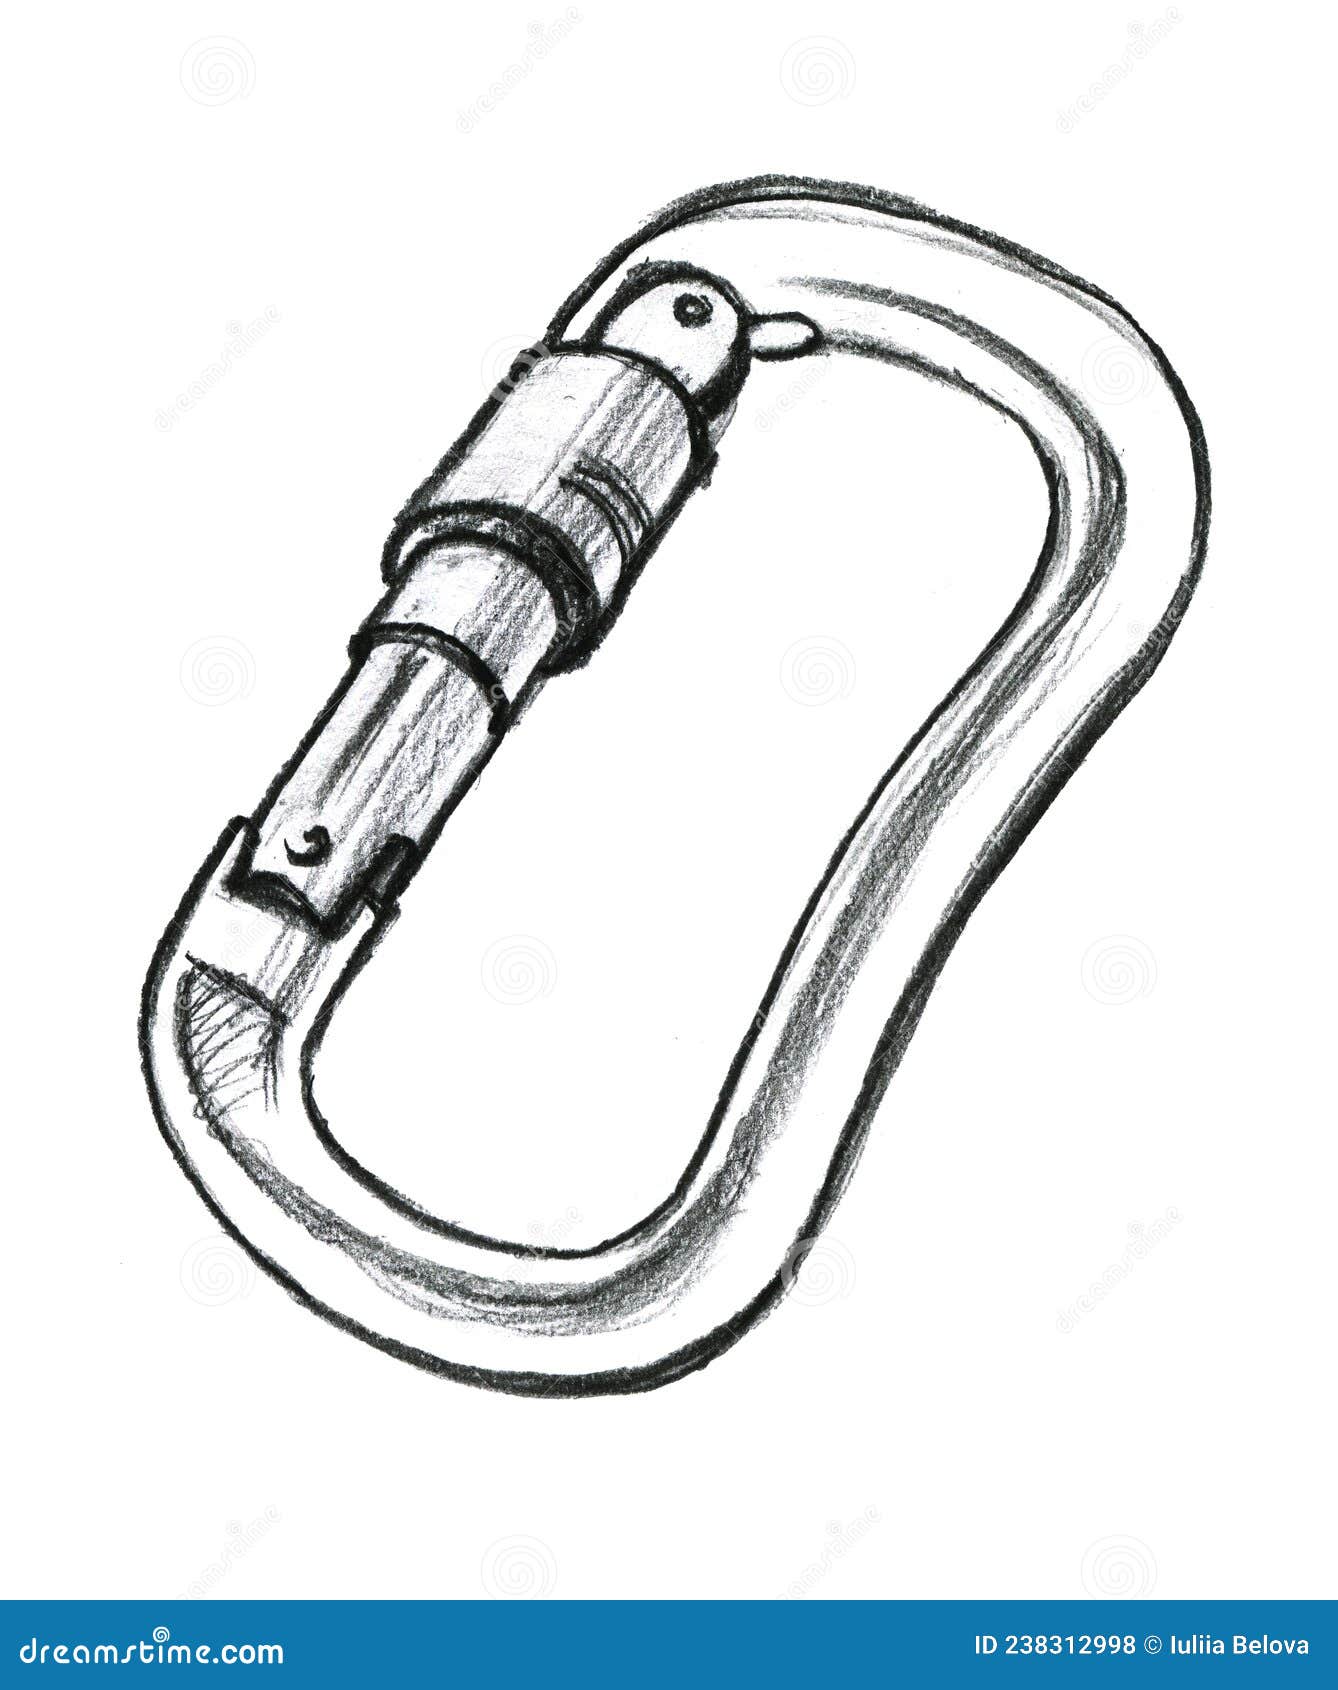 How to Draw Carabiner  YouTube